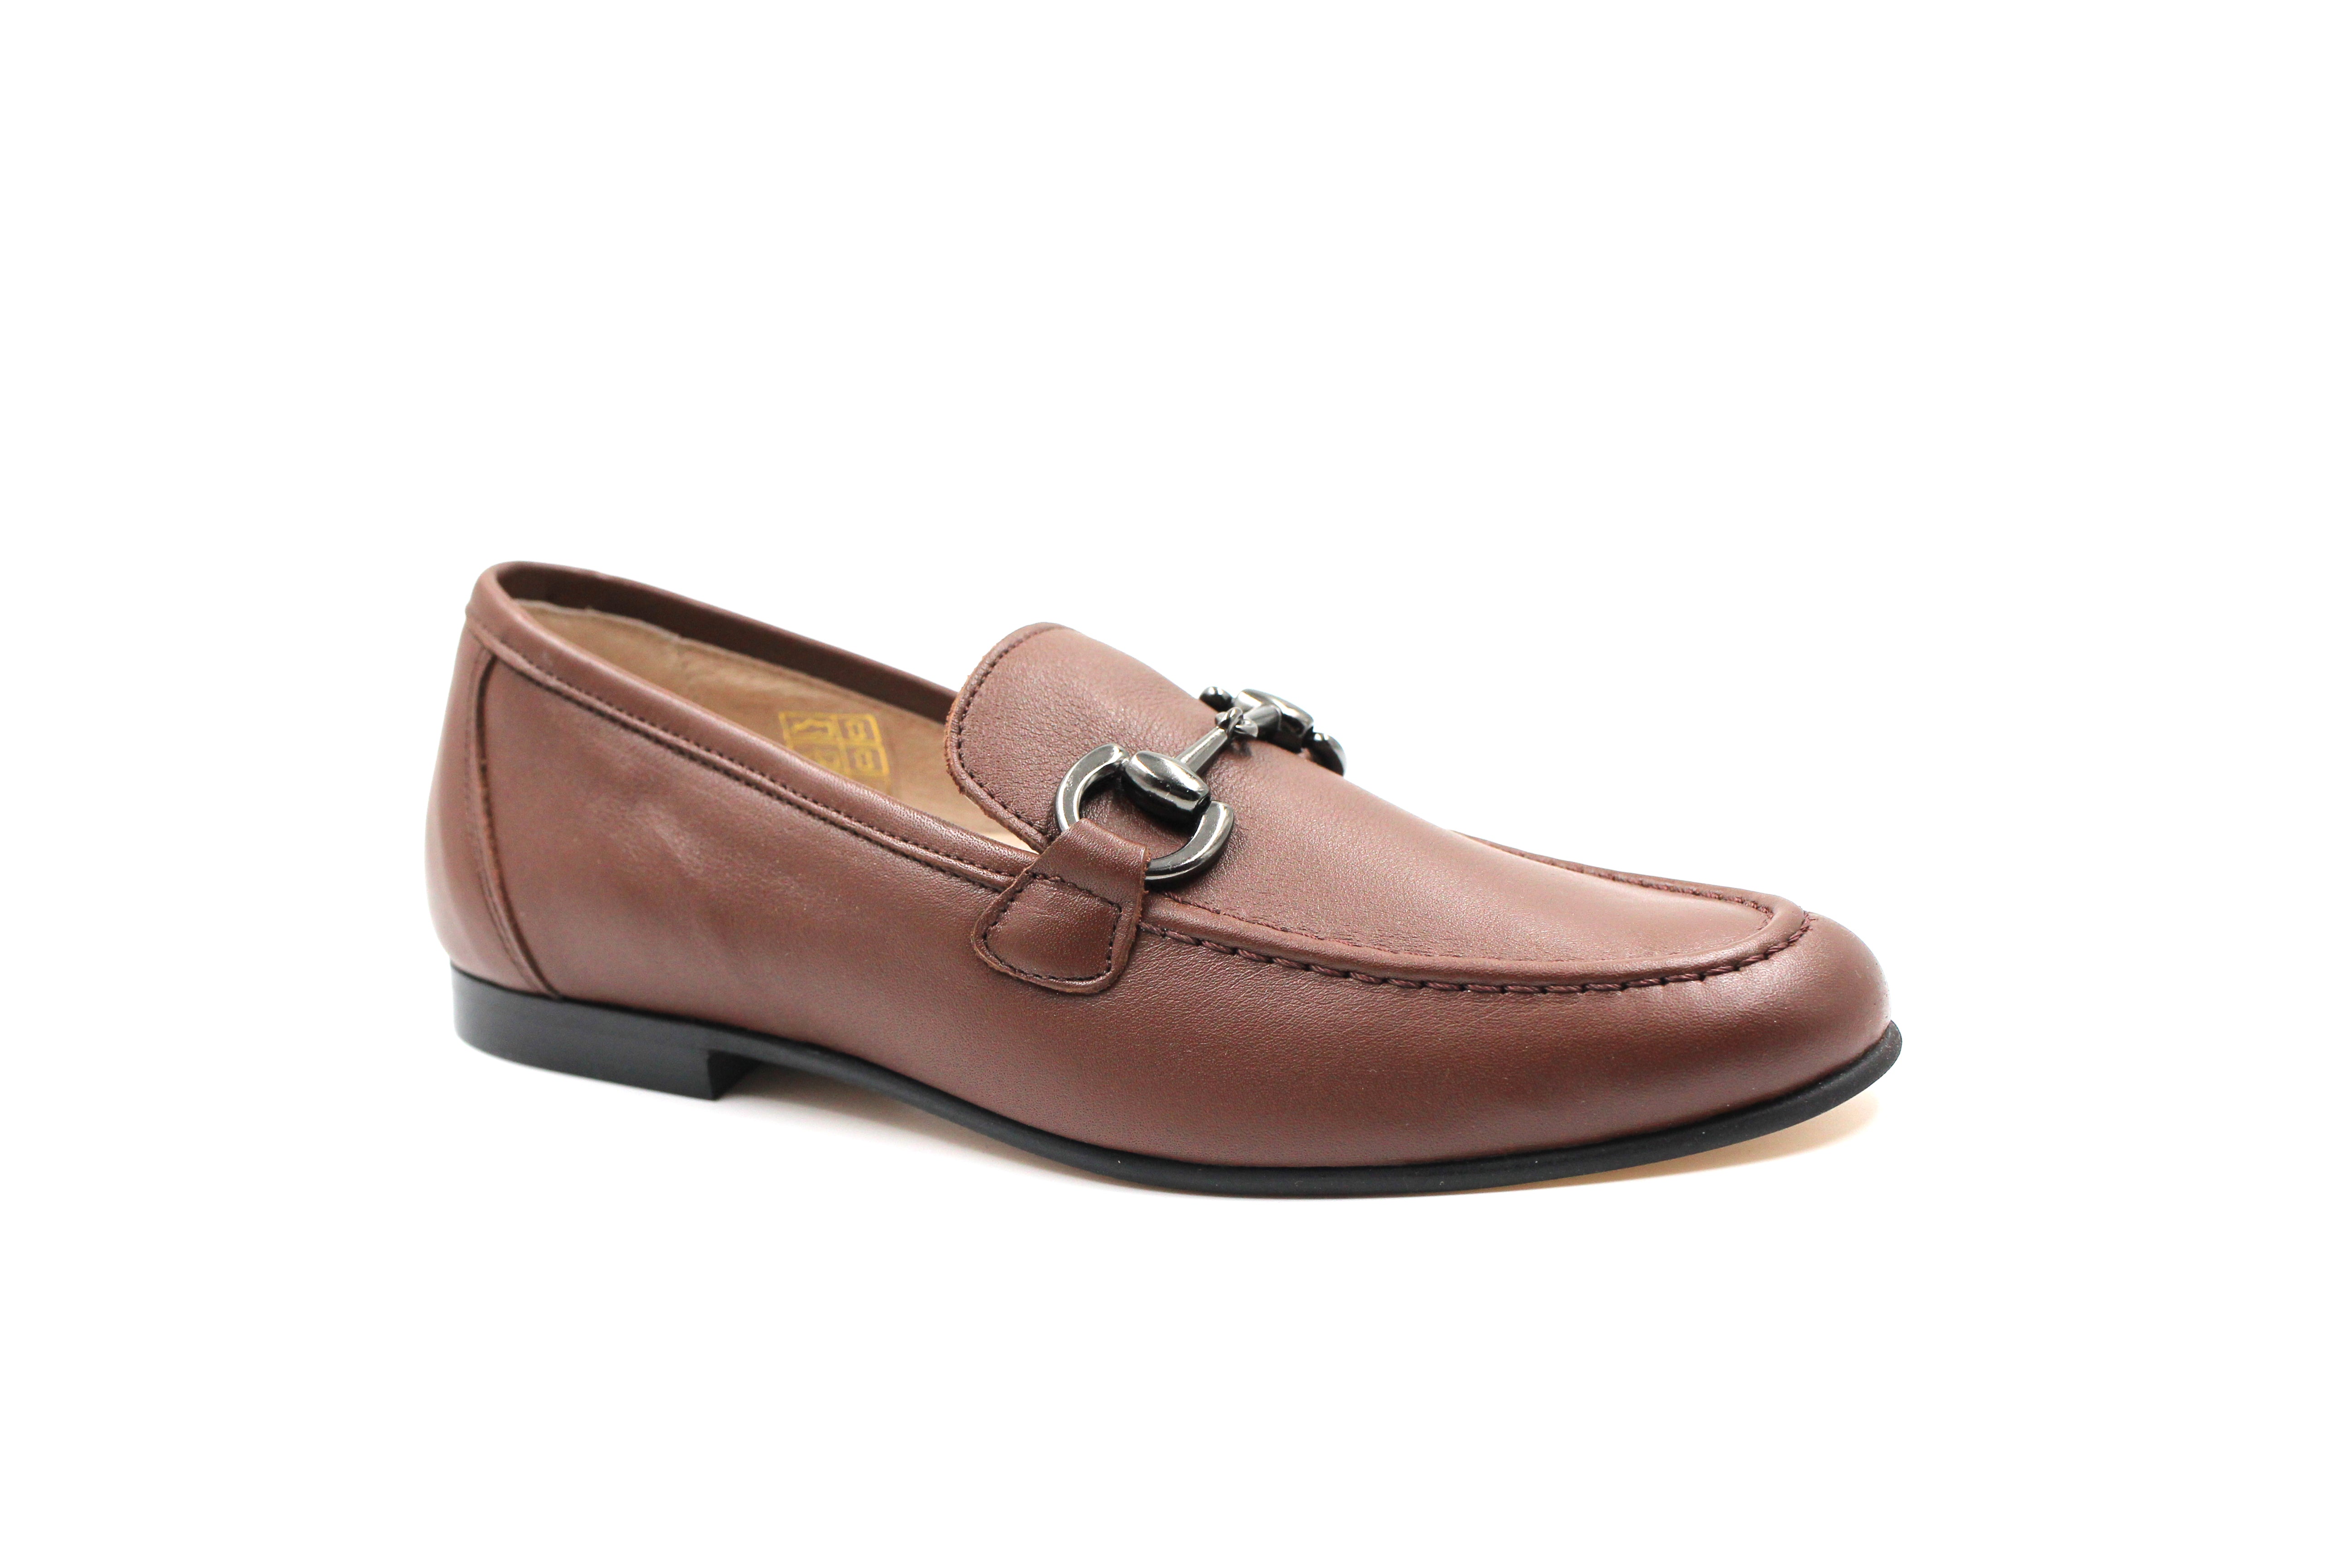 Hoo Brown Leather Buckle Loafer